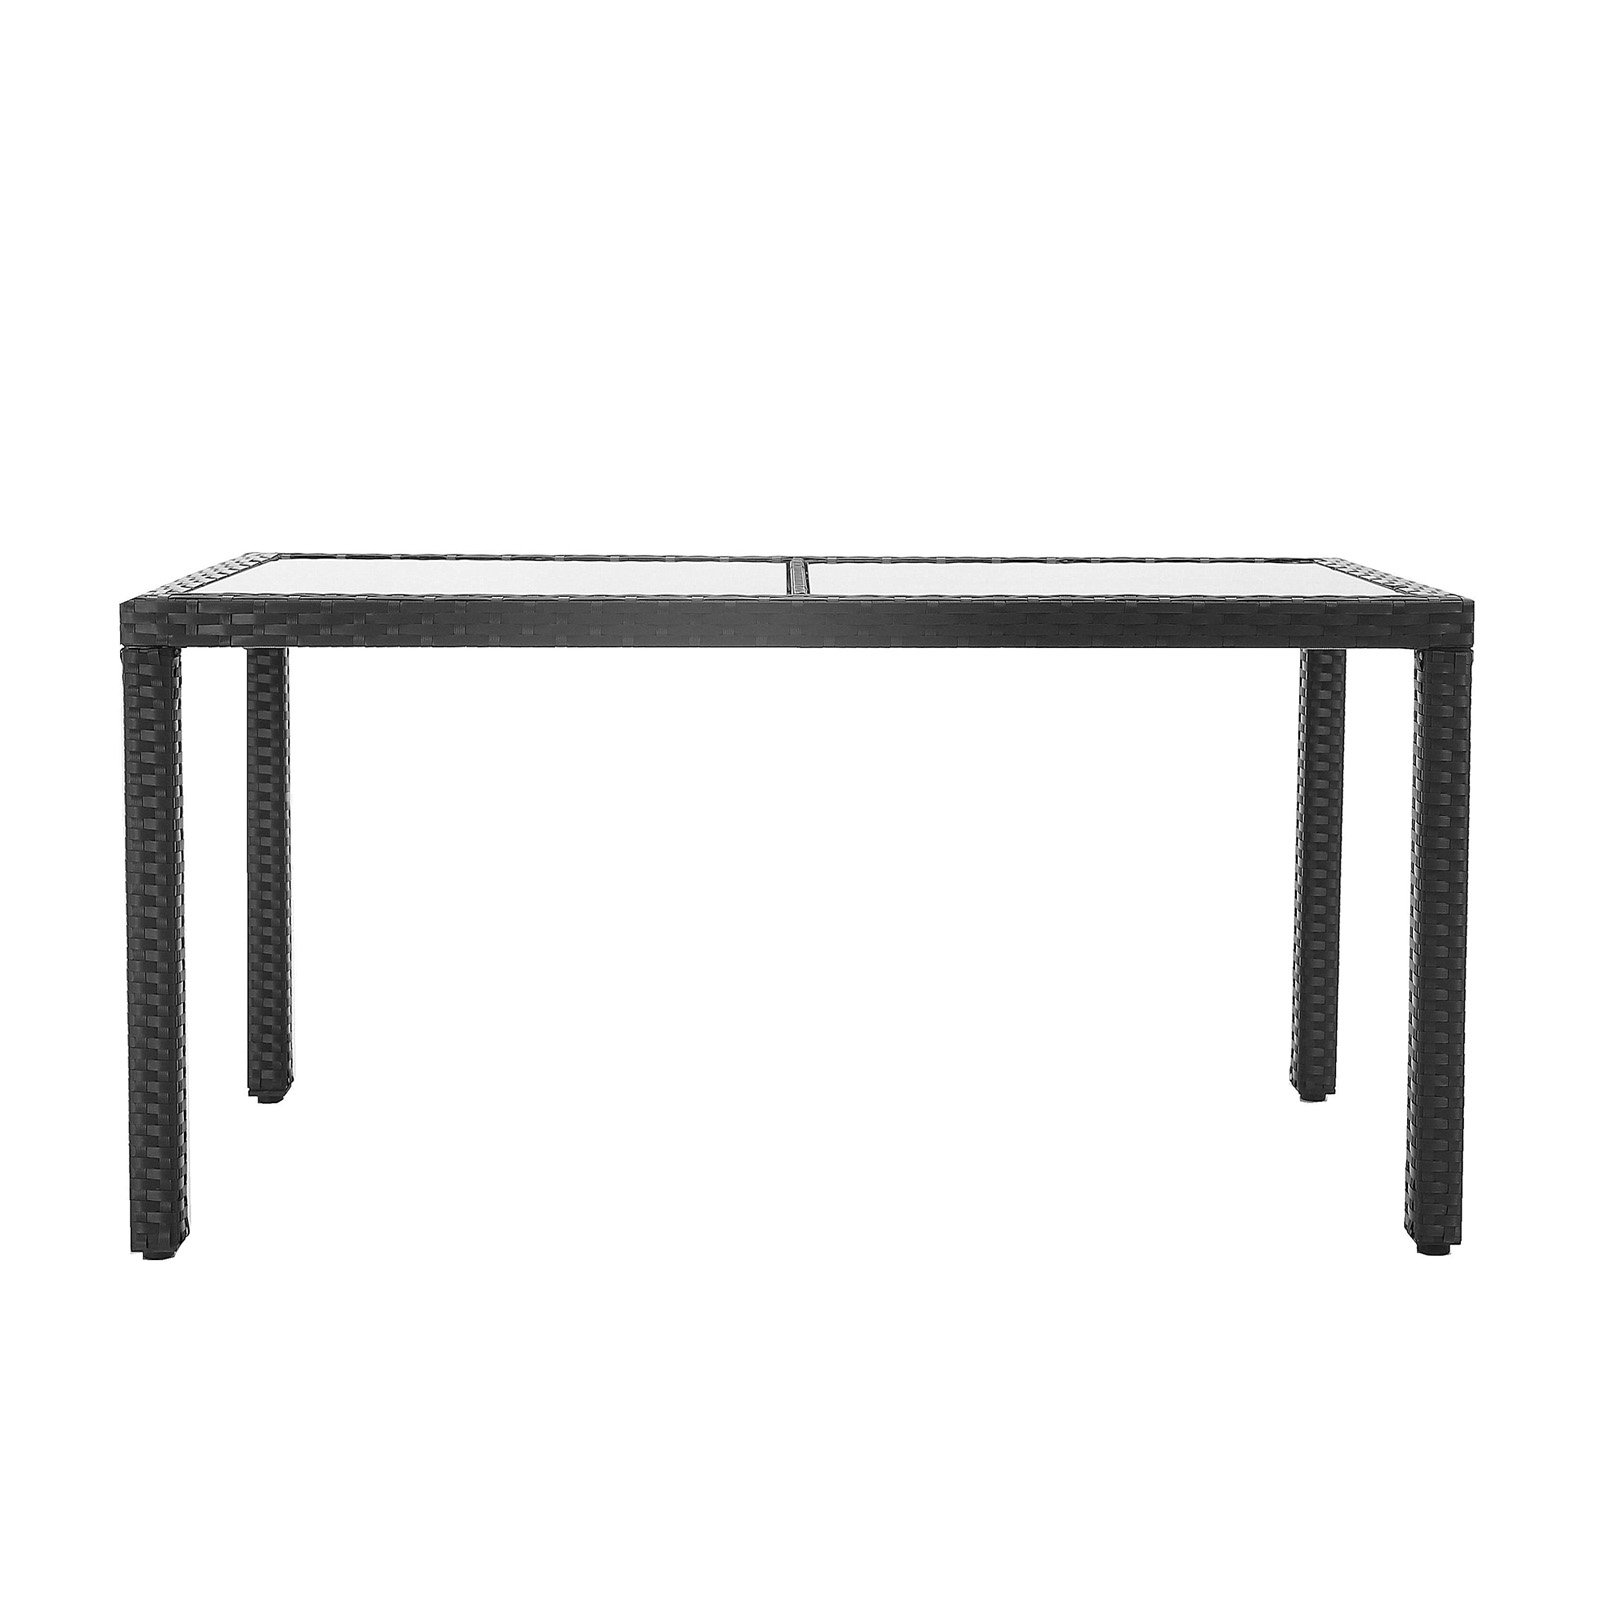 Baner Garden  Outdoor Patio Resin Wicker Steel Rectangle Dining Table Furniture, Chocolate - 57.1 x 30.3 x 28.5 in. - image 5 of 5